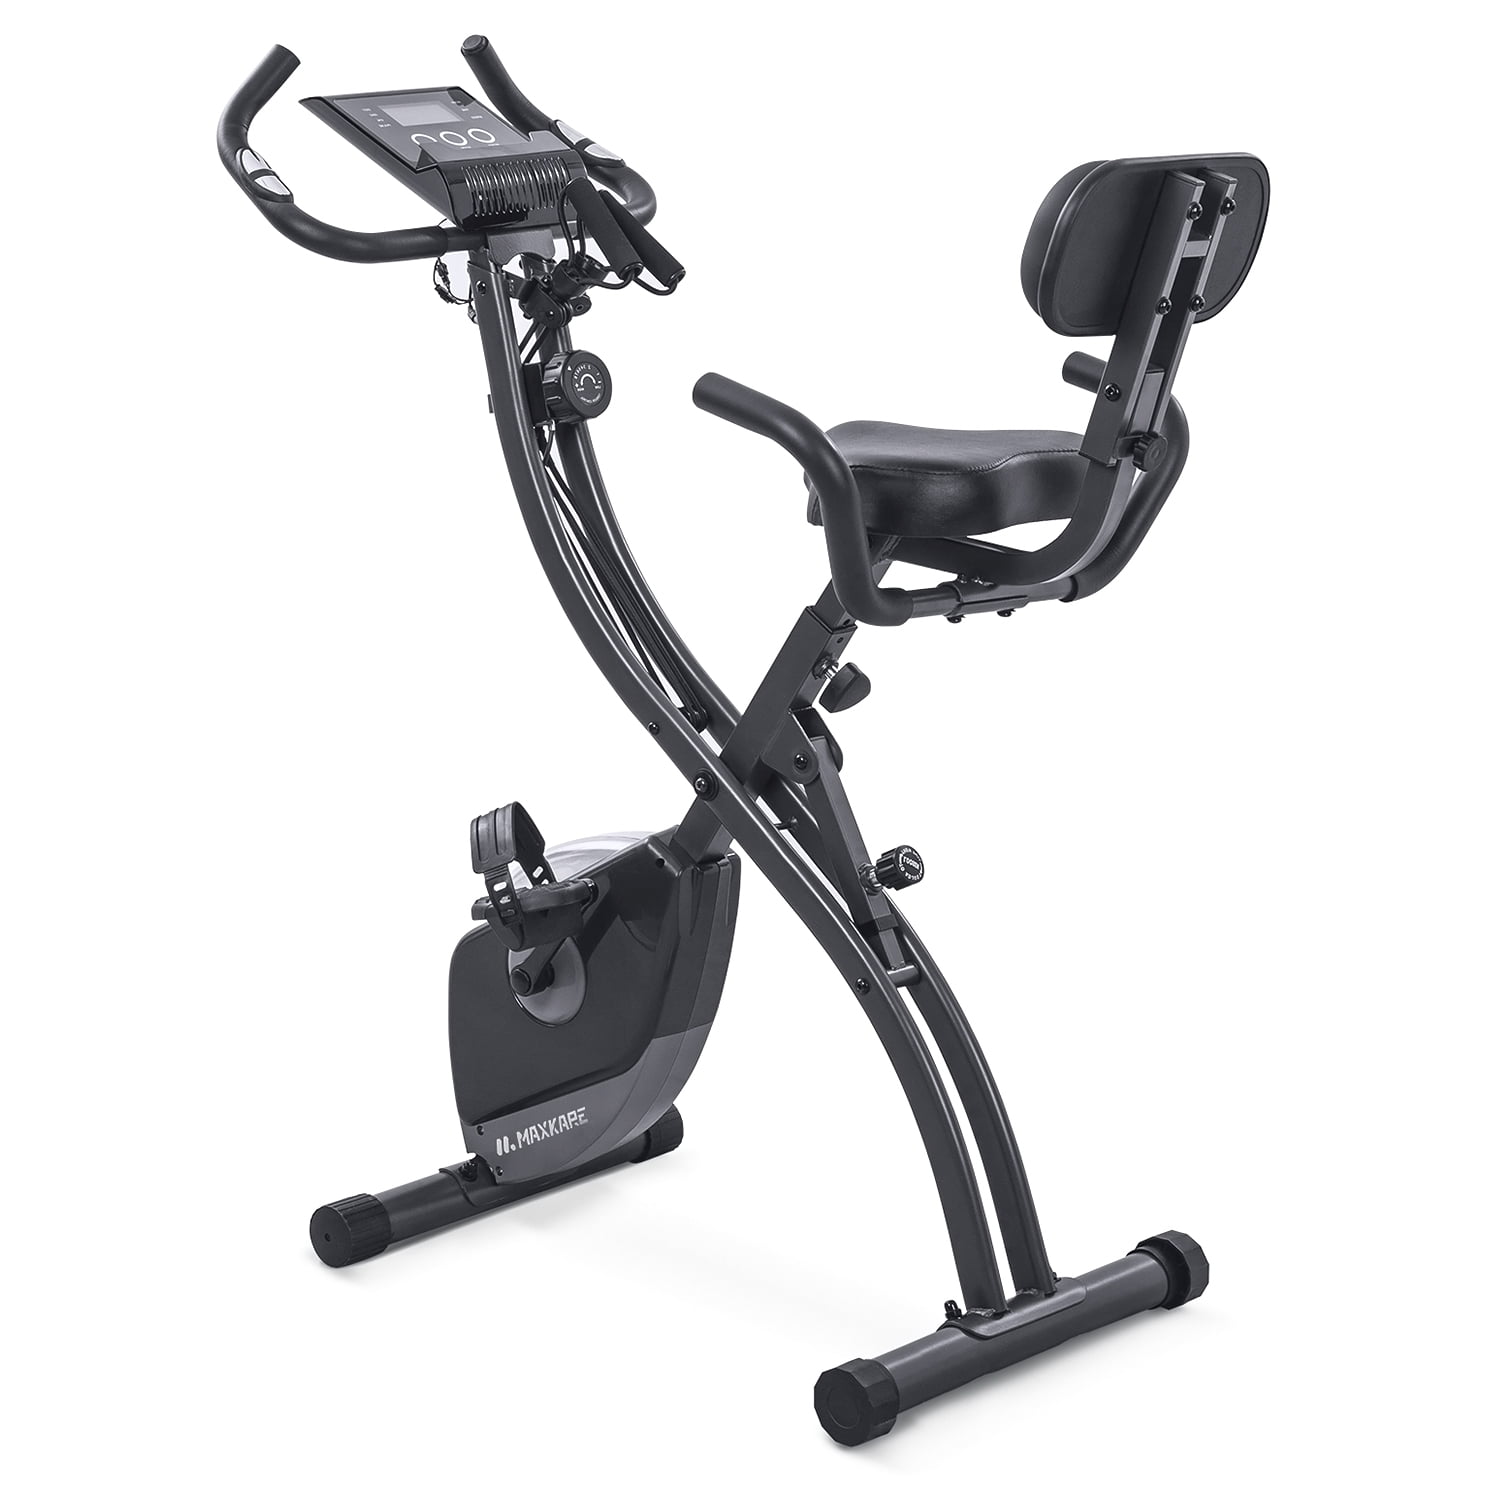 Details about   HEKA Exercise Bike Indoor Stationary Bicycle Home Gym Workout Cardio Cycling 